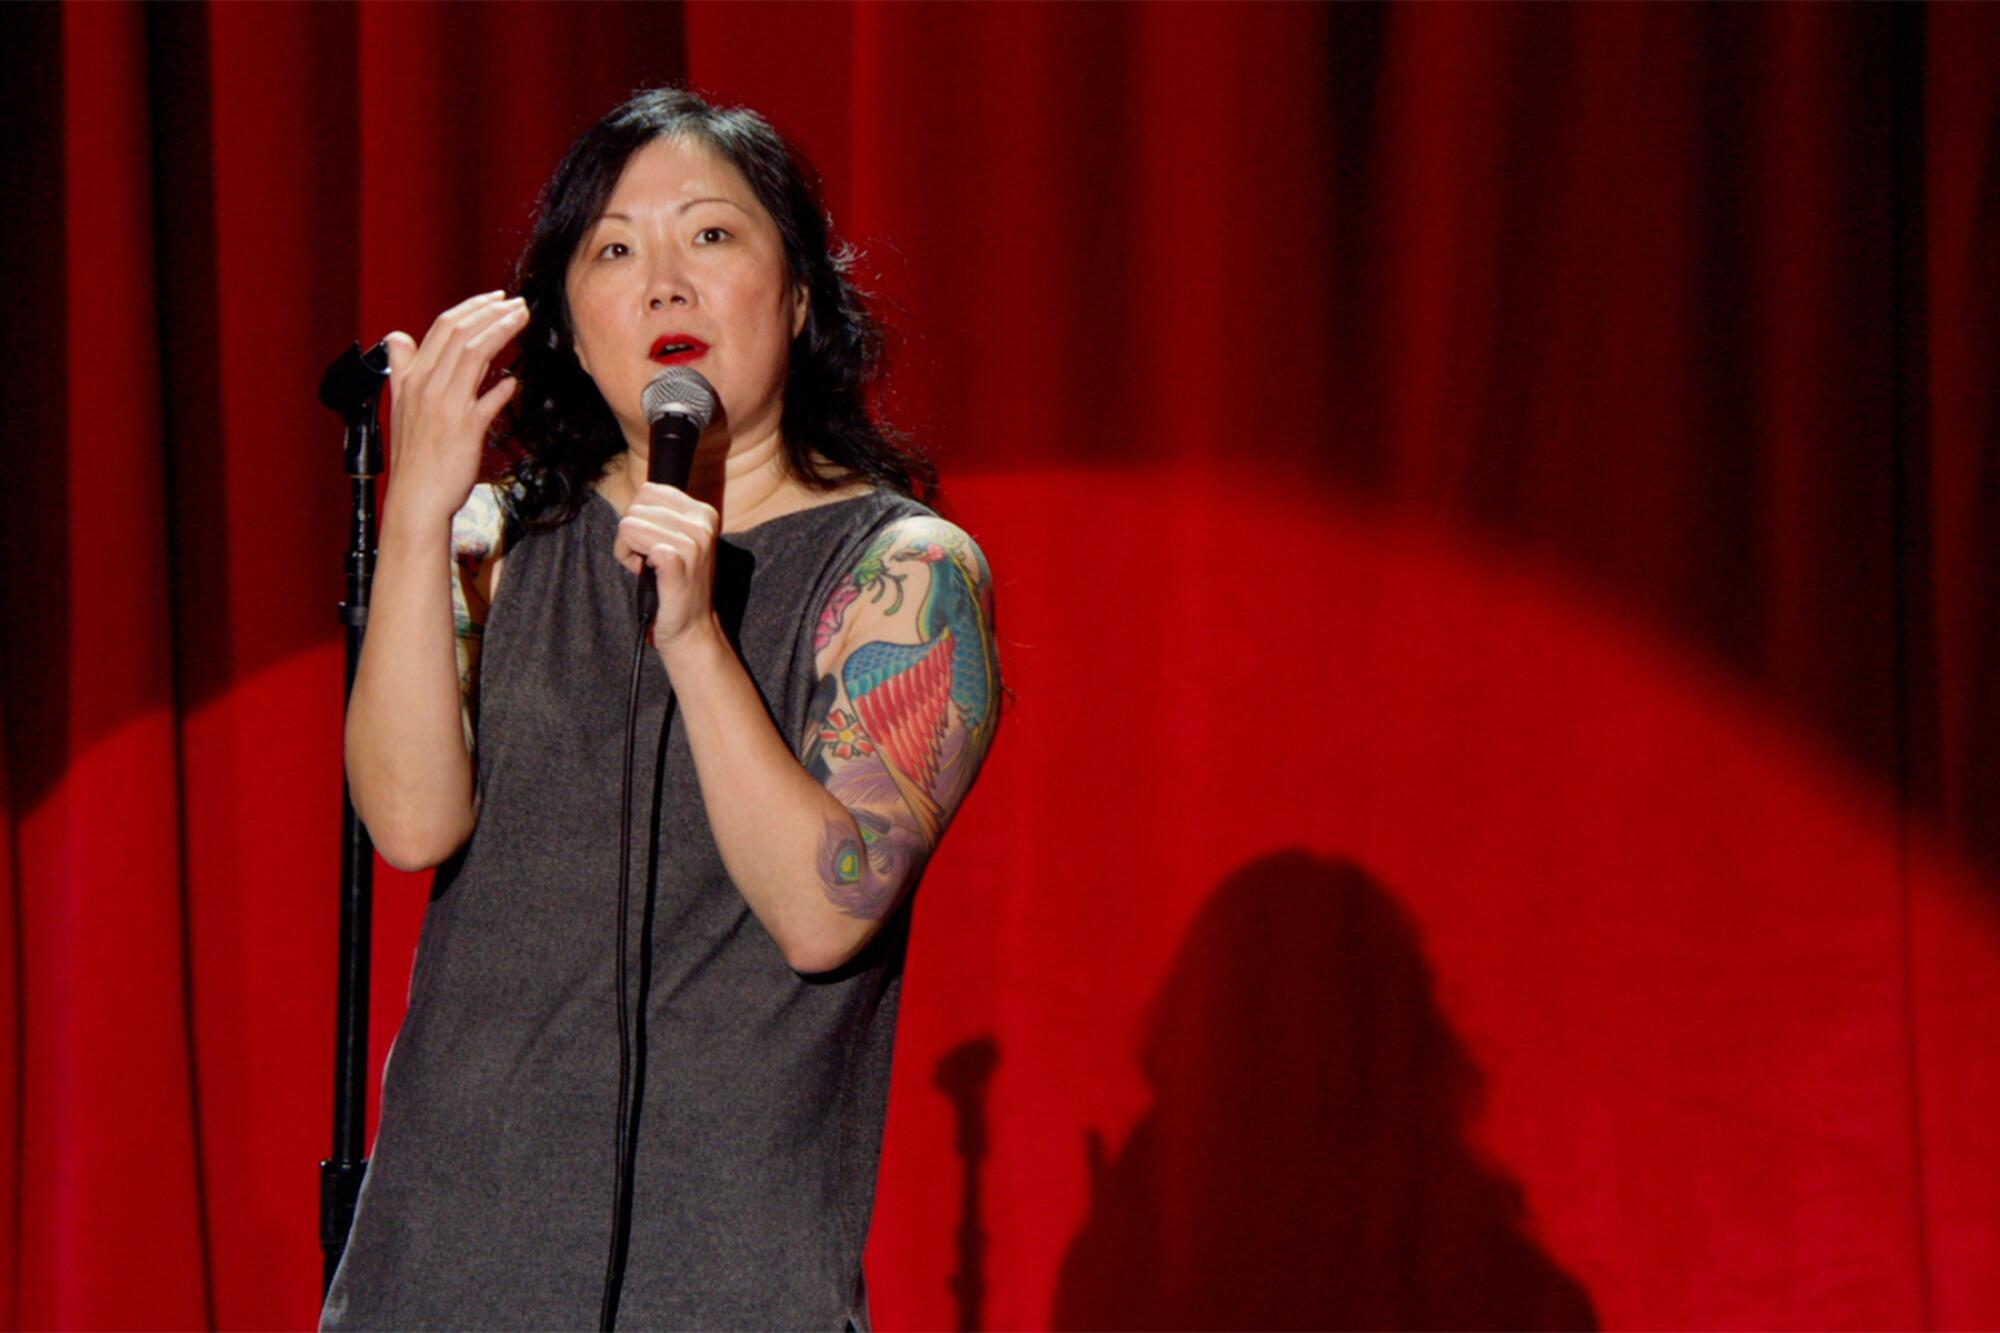 Margaret Cho wearing black and speaking into a microphone in front of a red curtain